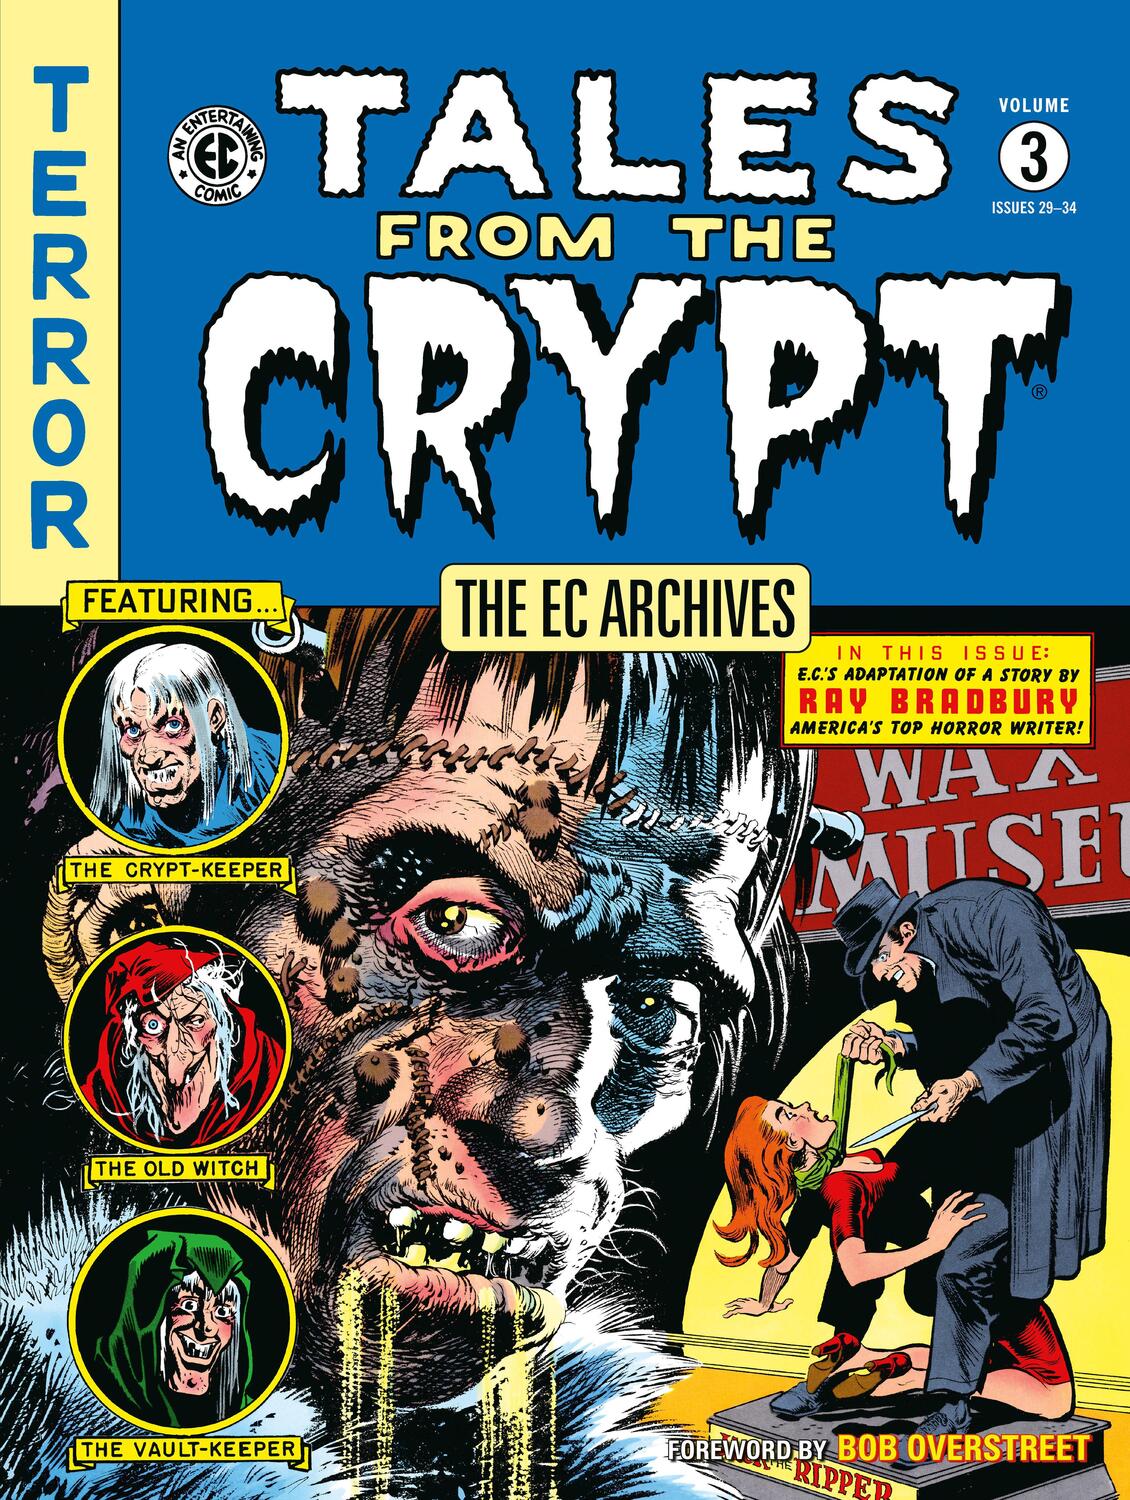 Cover: 9781506736686 | The Ec Archives: Tales From The Crypt Volume 3 | Al Feldstein (u. a.)